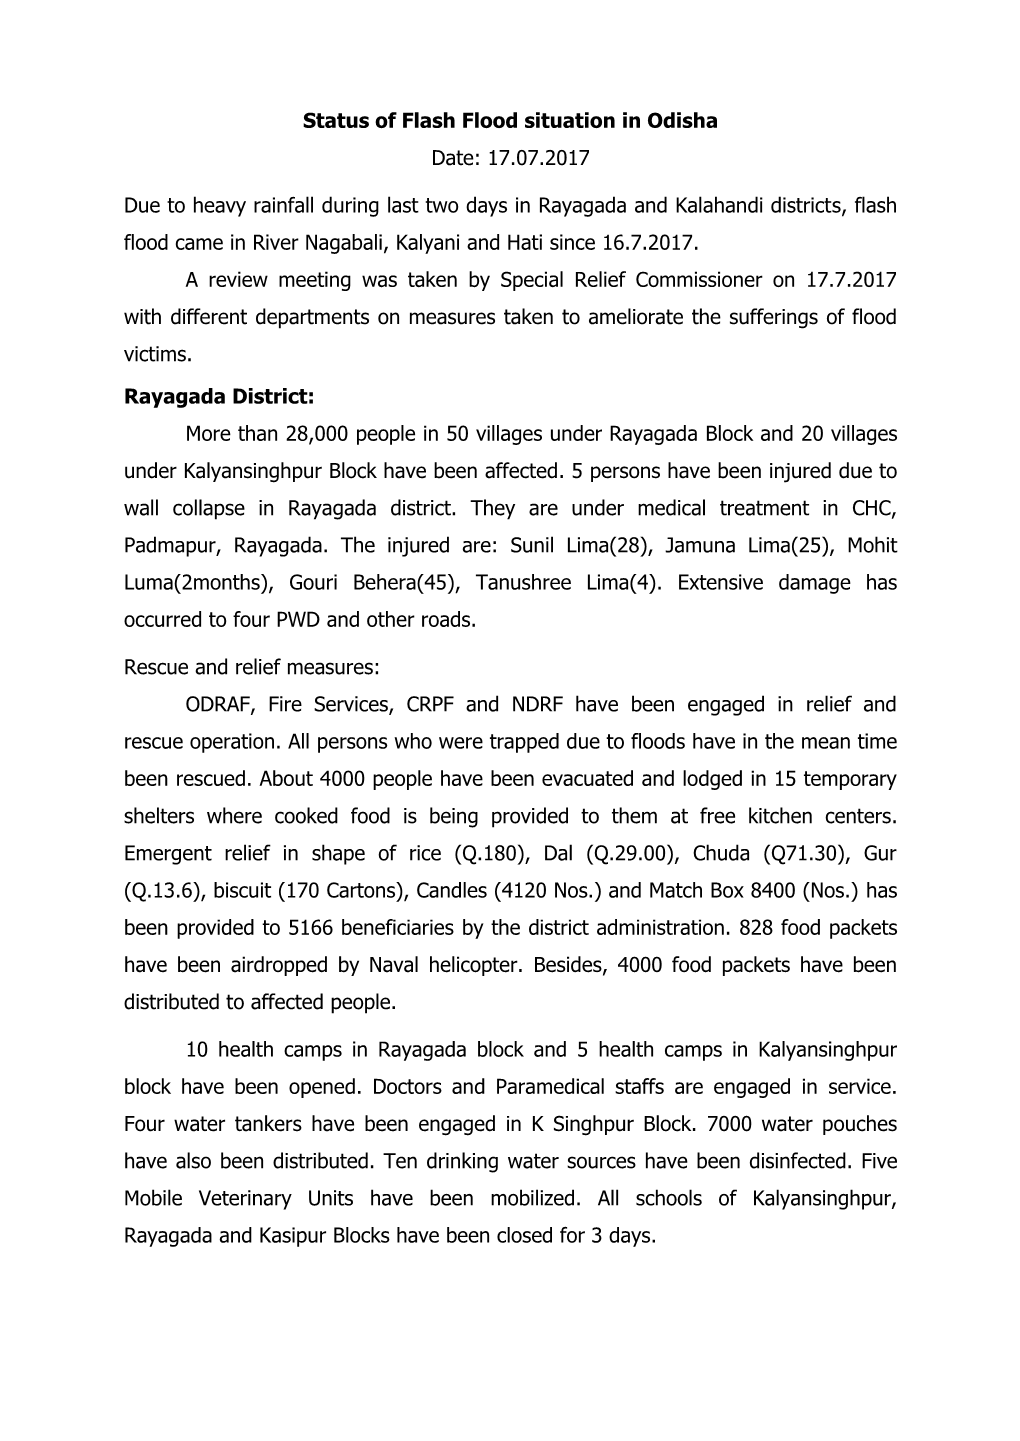 Status of Flash Flood Situation in Odisha Date: 17.07.2017 Due To